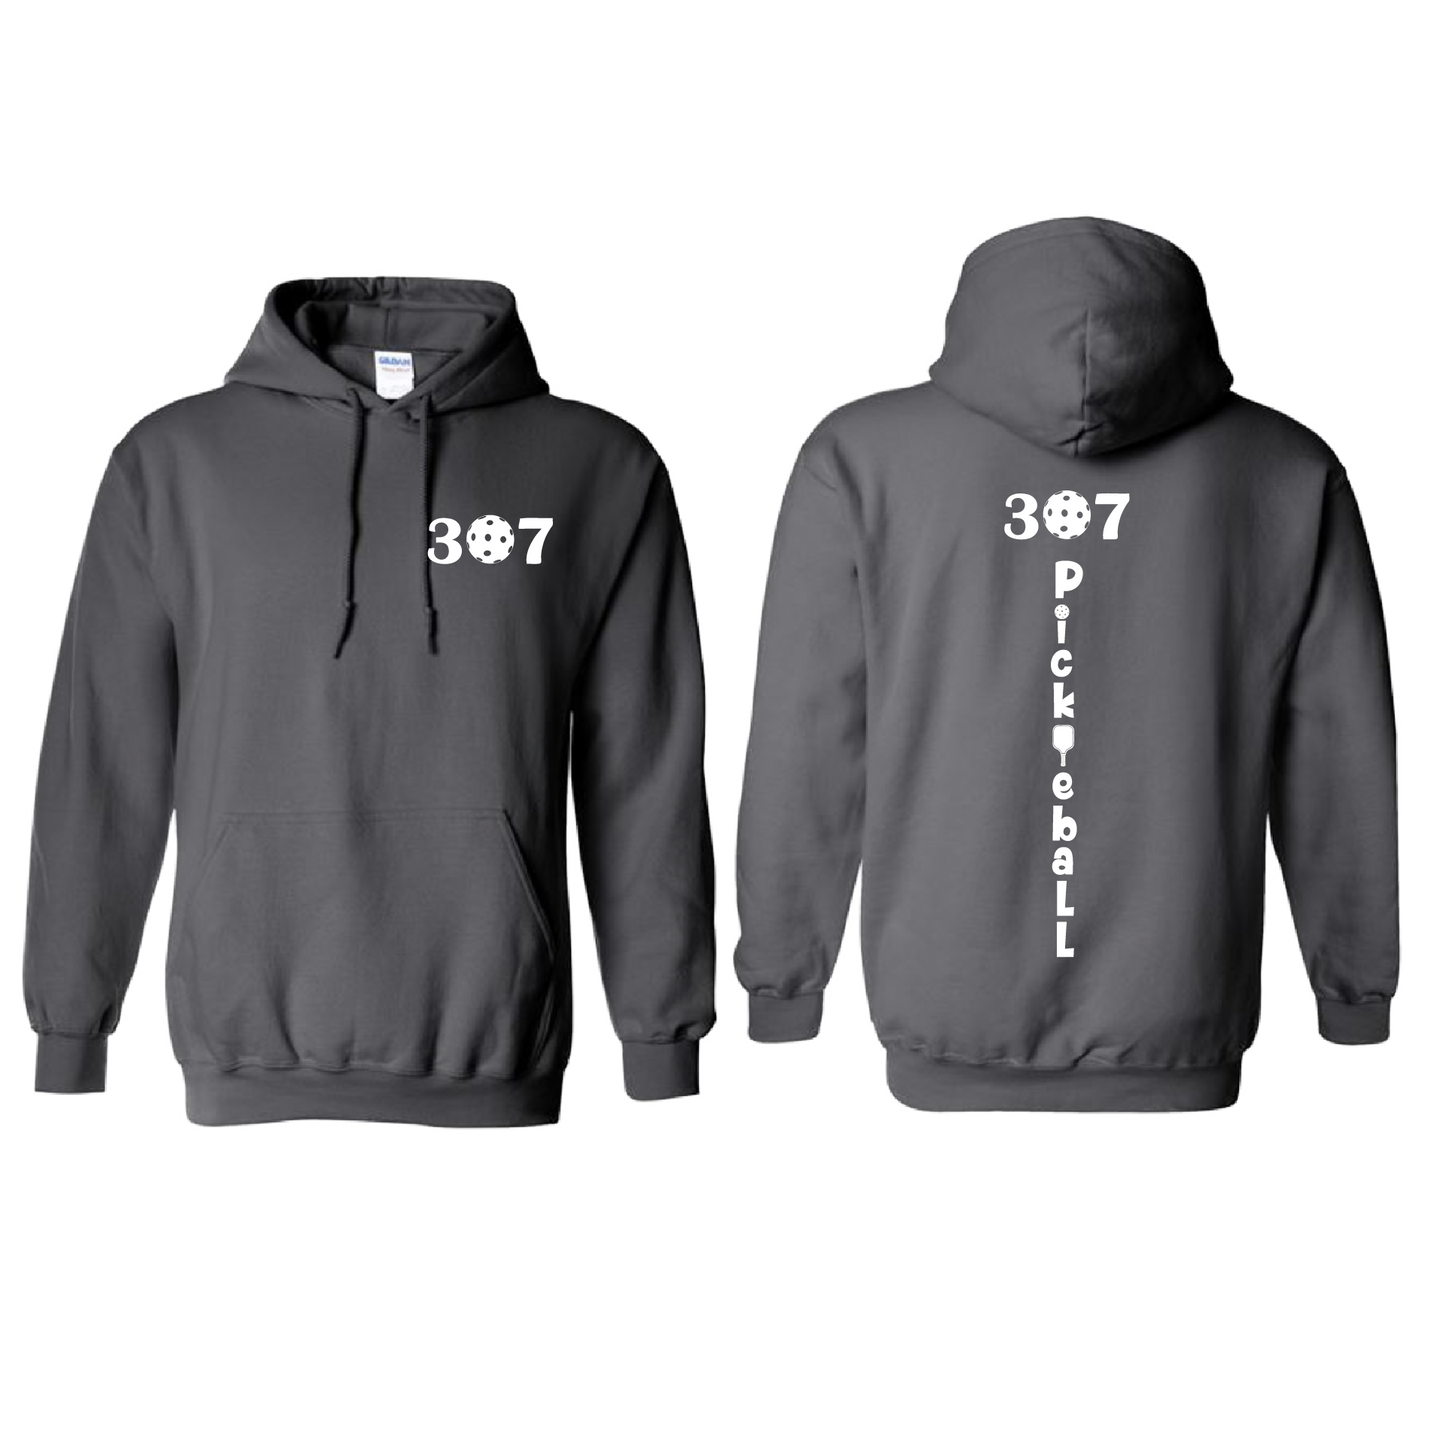 Design: 307 Wyoming Pickleball Club  Unisex Hooded Sweatshirt: Moisture-wicking, double-lined hood, front pouch pocket.  This unisex hooded sweatshirt is ultra comfortable and soft. Stay warm on the Pickleball courts while being that hit with this one of kind design.